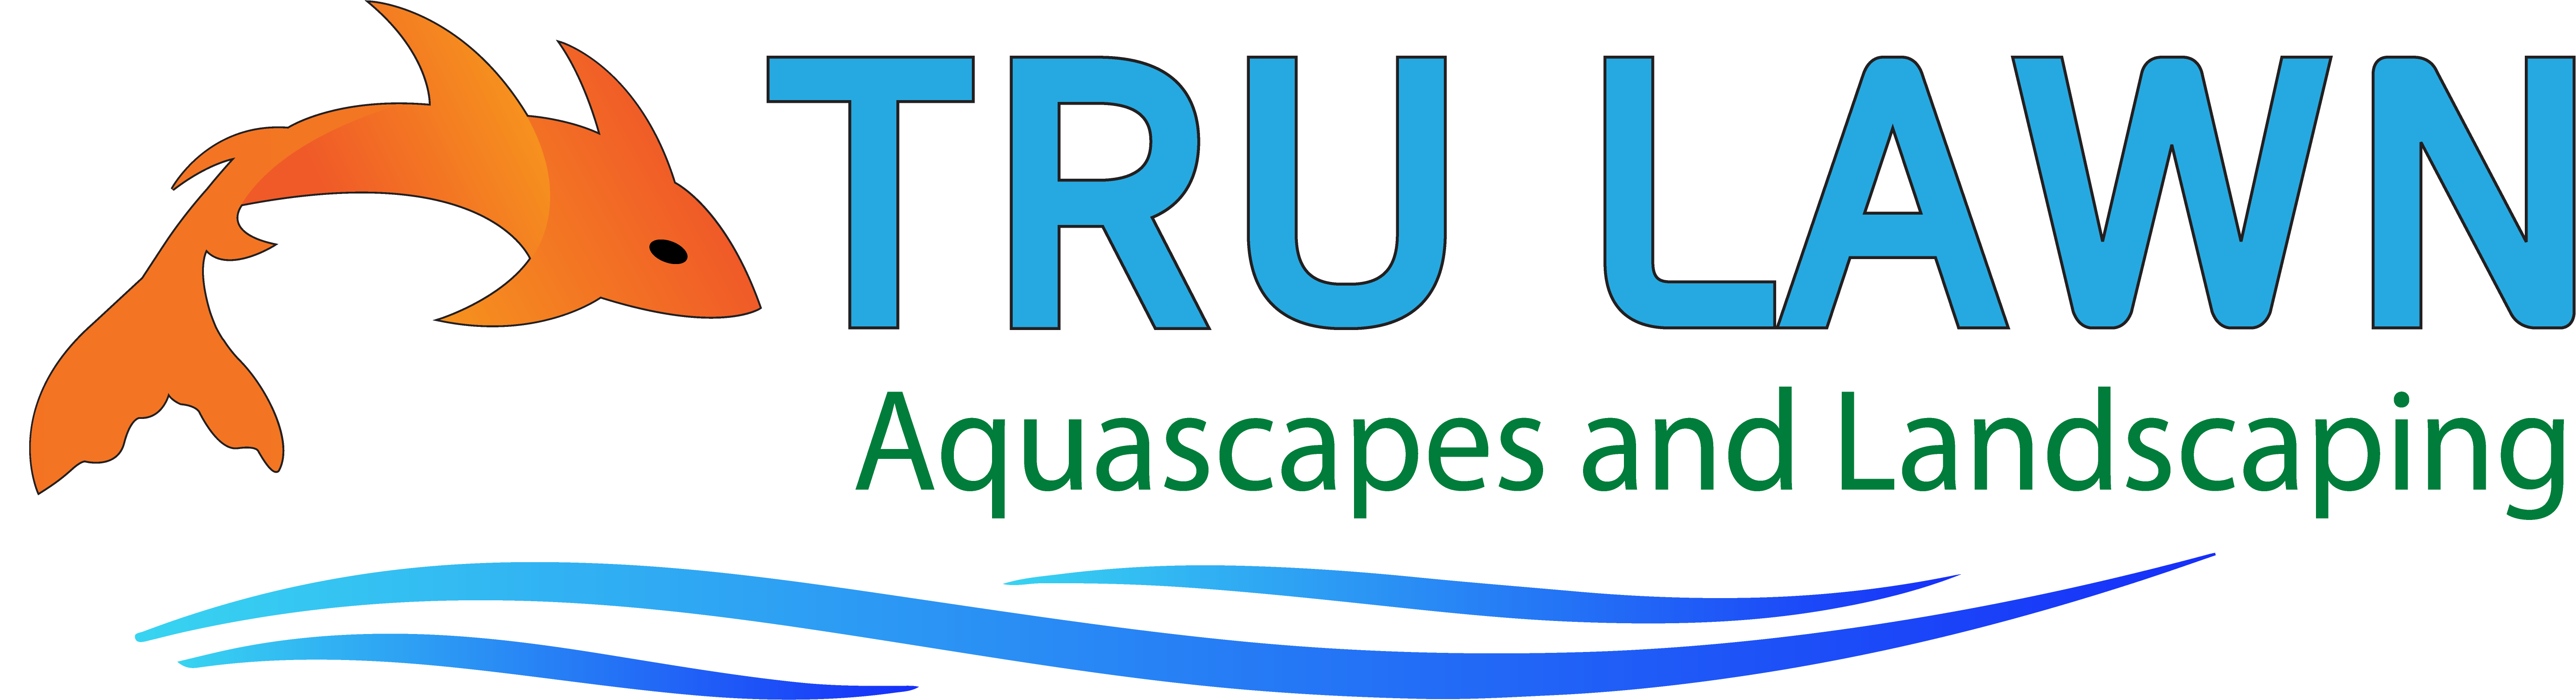 Tru Lawn | Aquascapes and Landscaping